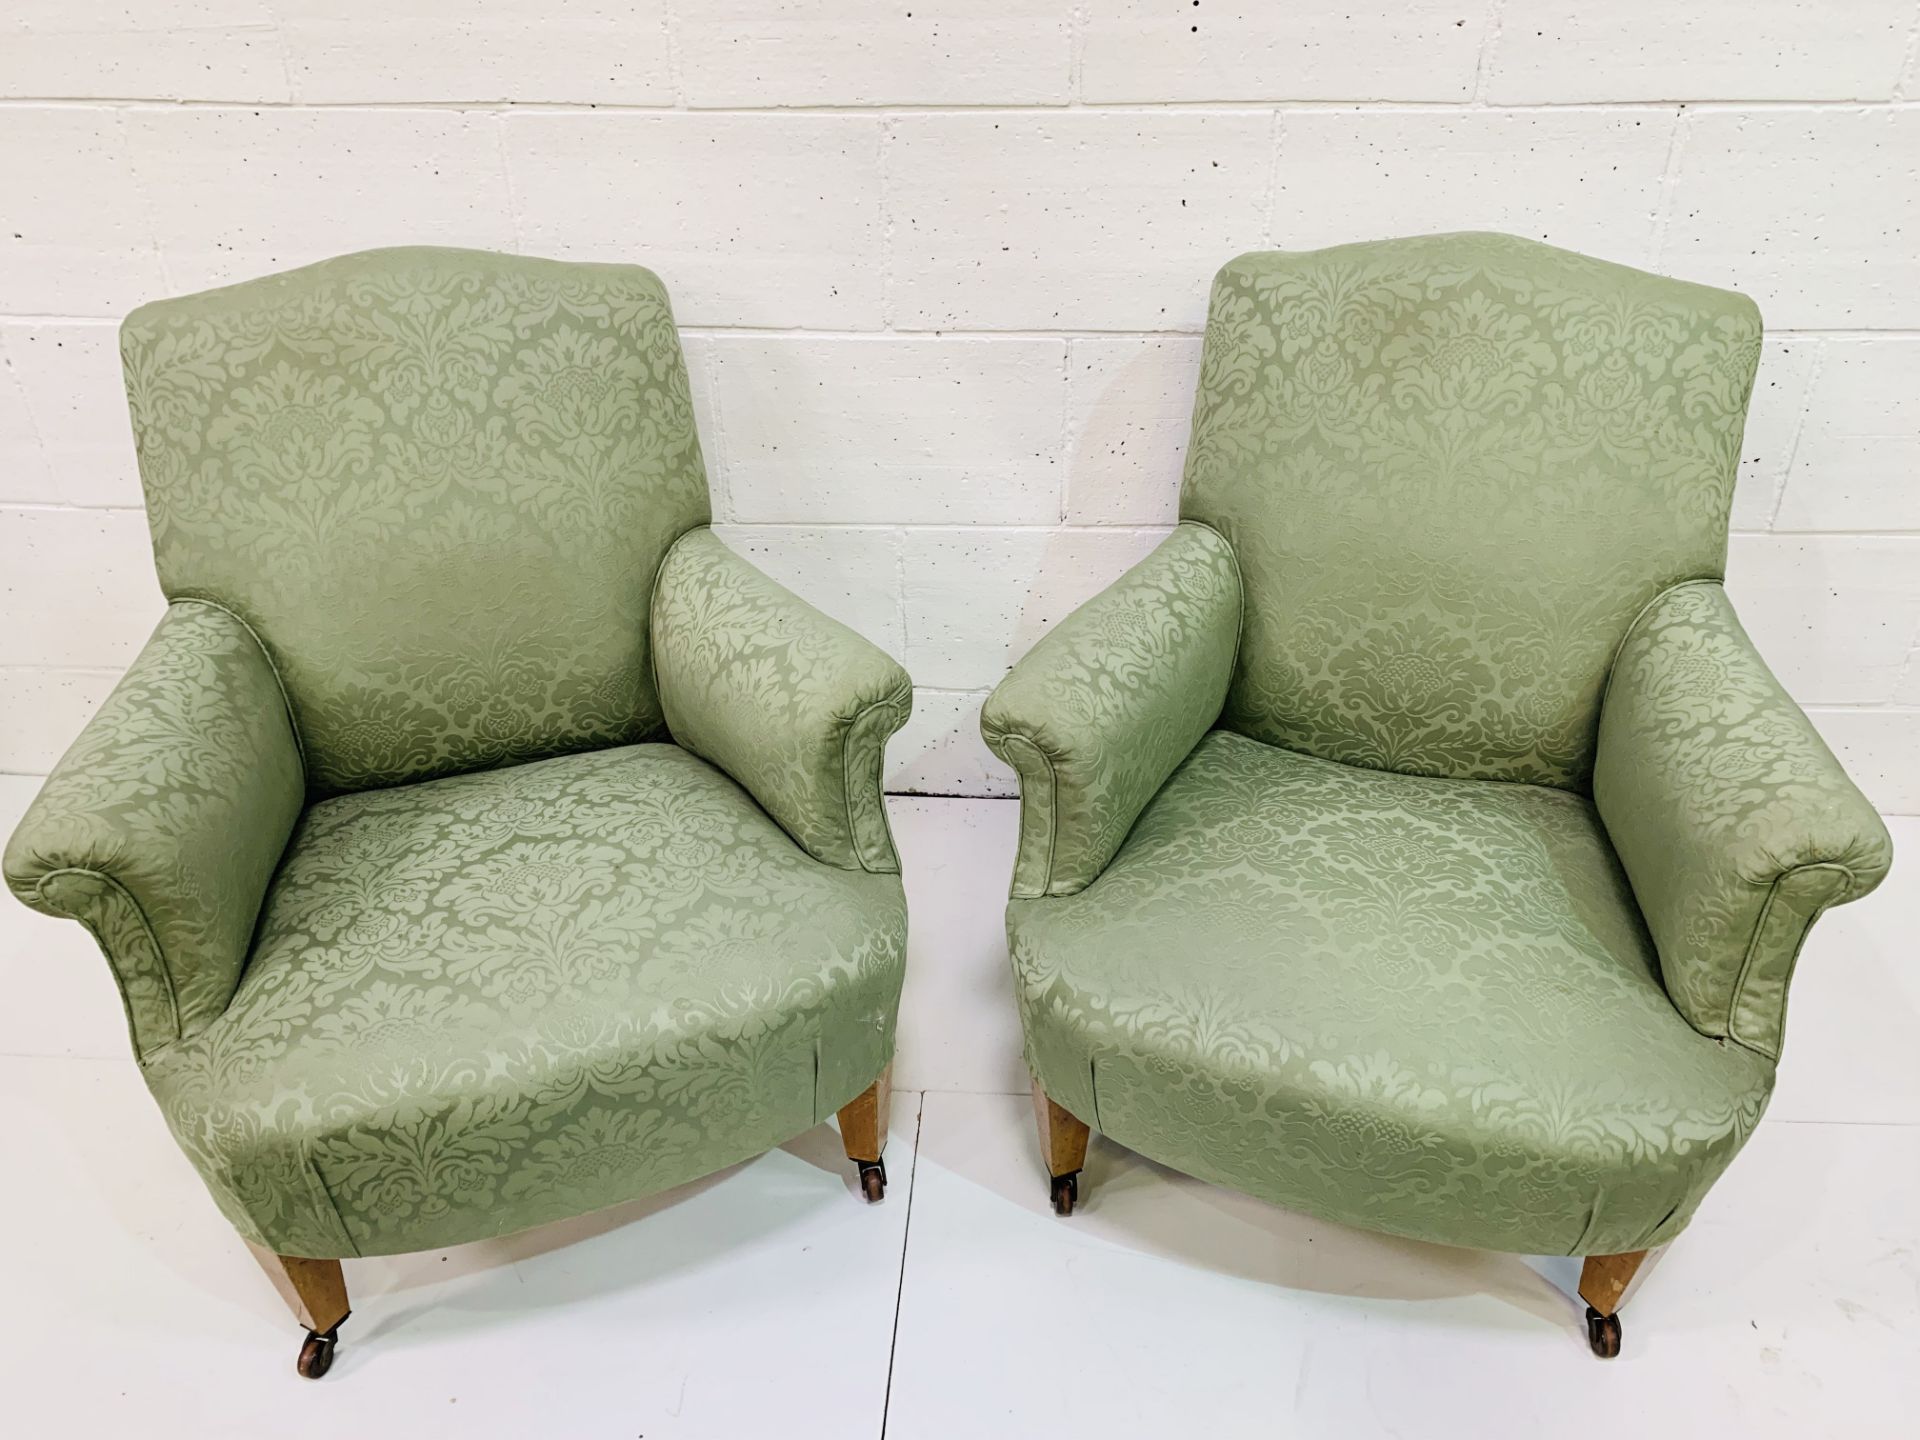 Pair of green upholstered arm chairs on ceramic casters. - Image 4 of 4